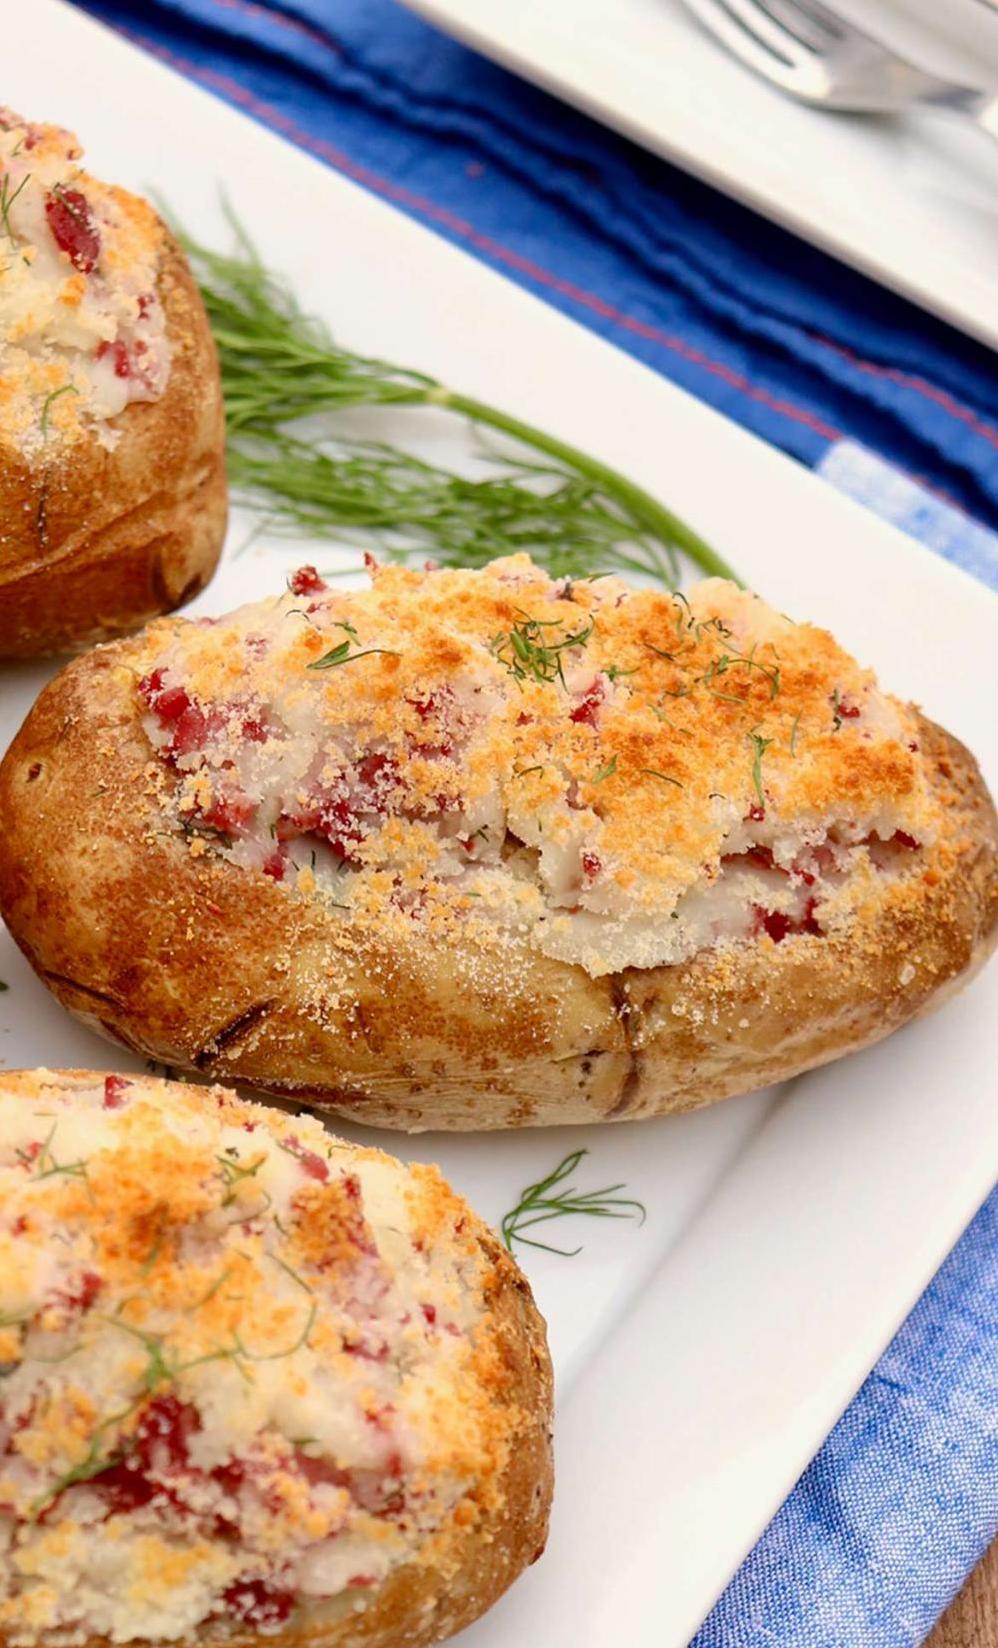  These potatoes are so rich and delicious, you'll feel like a king or queen.